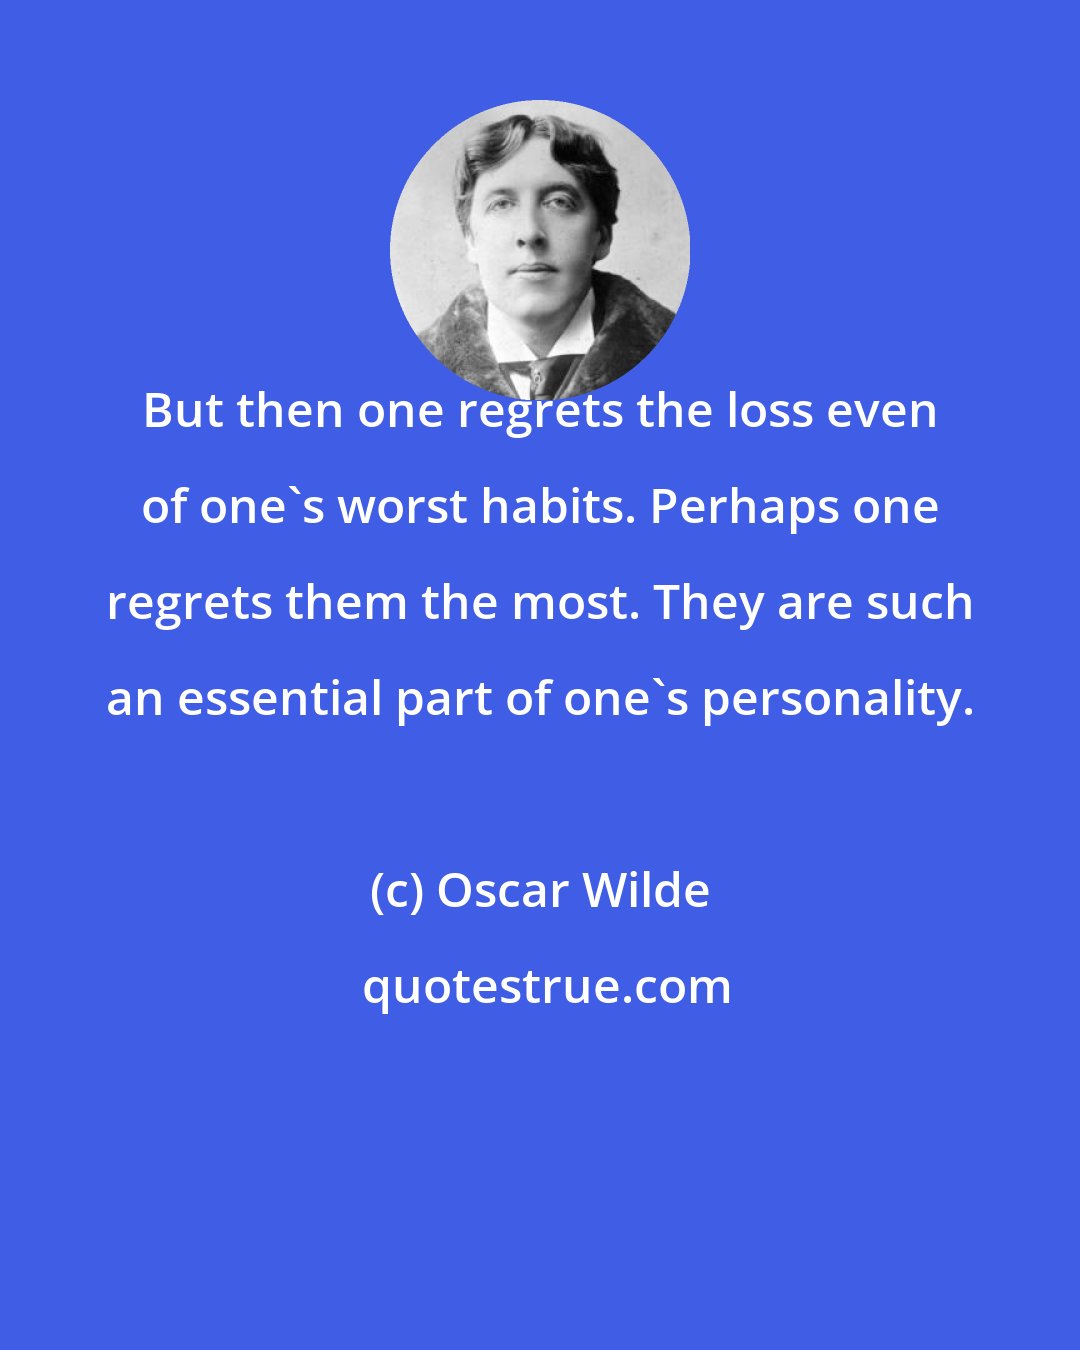 Oscar Wilde: But then one regrets the loss even of one's worst habits. Perhaps one regrets them the most. They are such an essential part of one's personality.